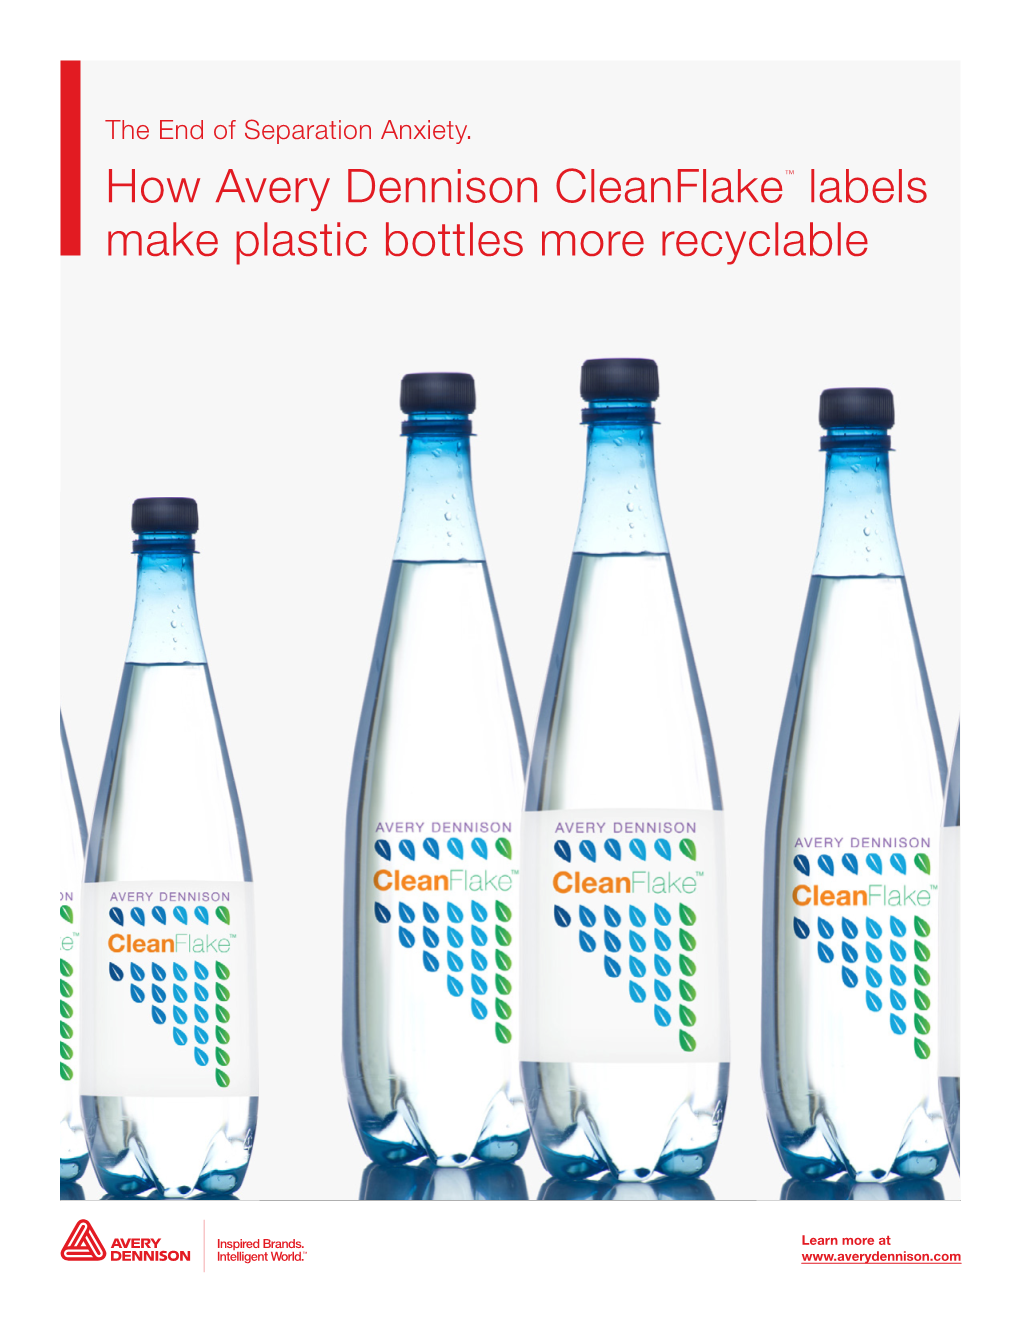 How Avery Dennison Cleanflake™ Labels Make Plastic Bottles More Recyclable